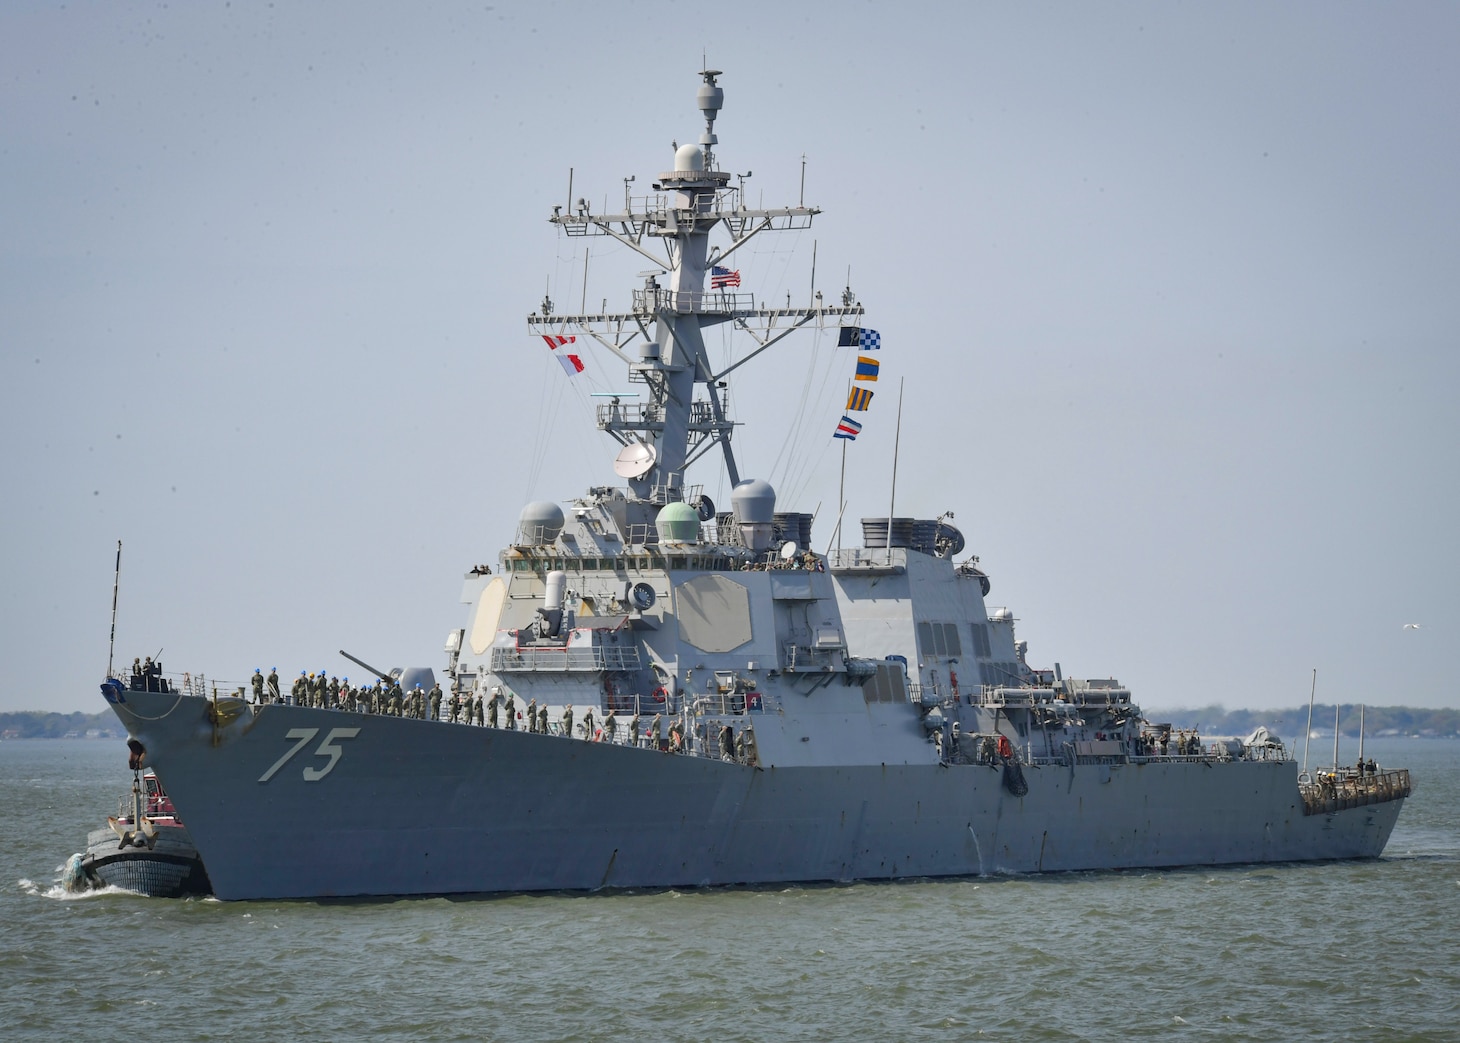 The Arleigh Burke-class guided-missile destroyer USS Donald Cook (DDG 75) arrives at Naval Station Norfolk.